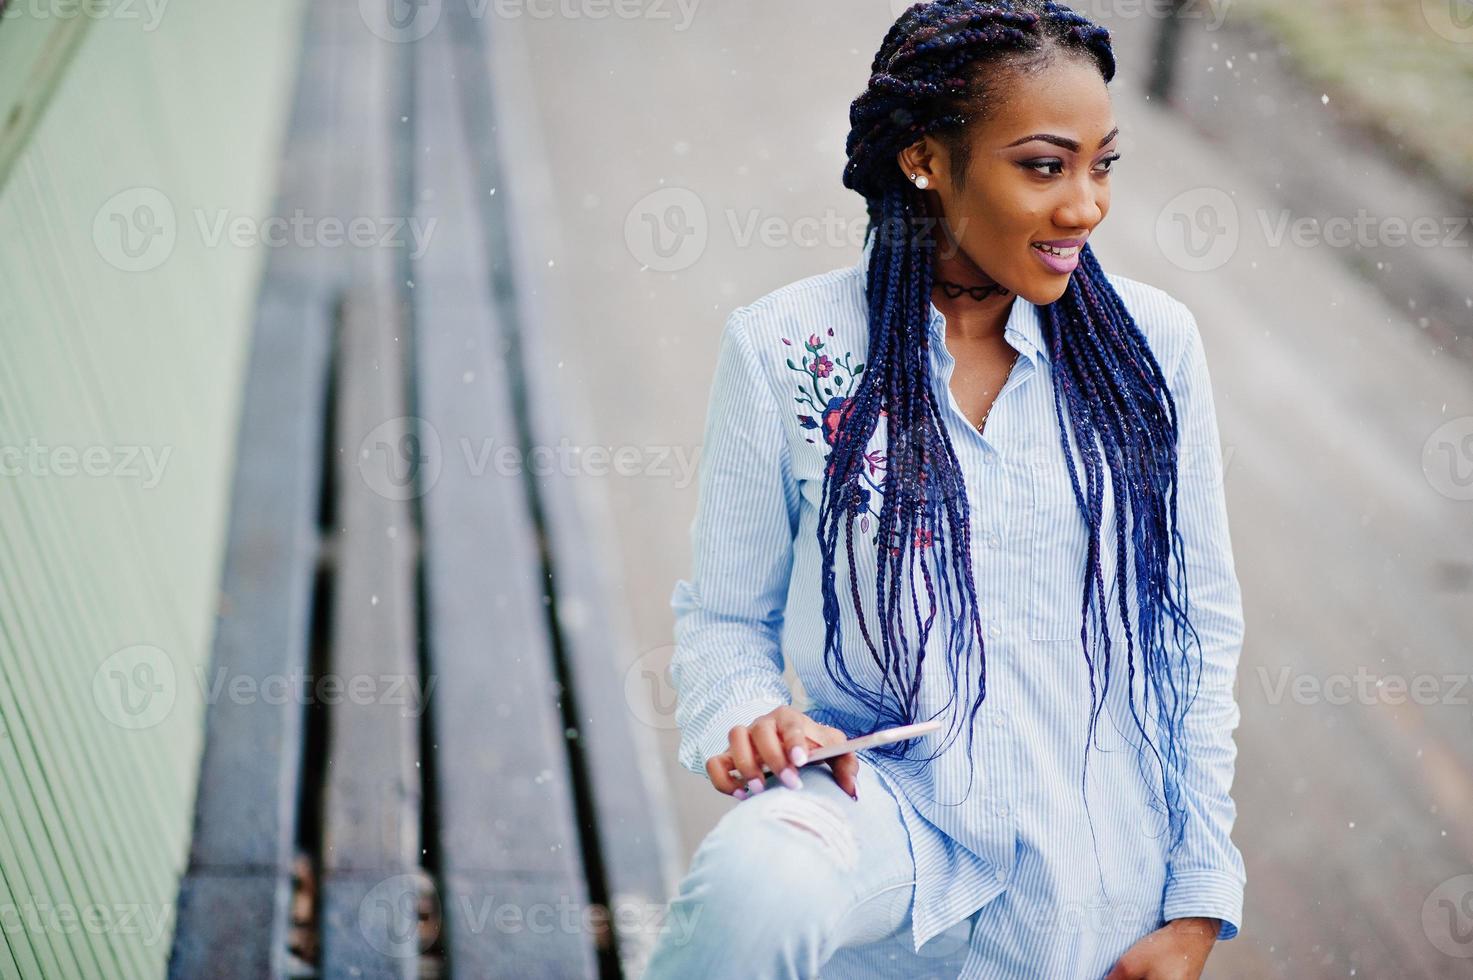 Stylish african american girl with dreads holding mobile phone at hand, outdoor snowy weather. photo